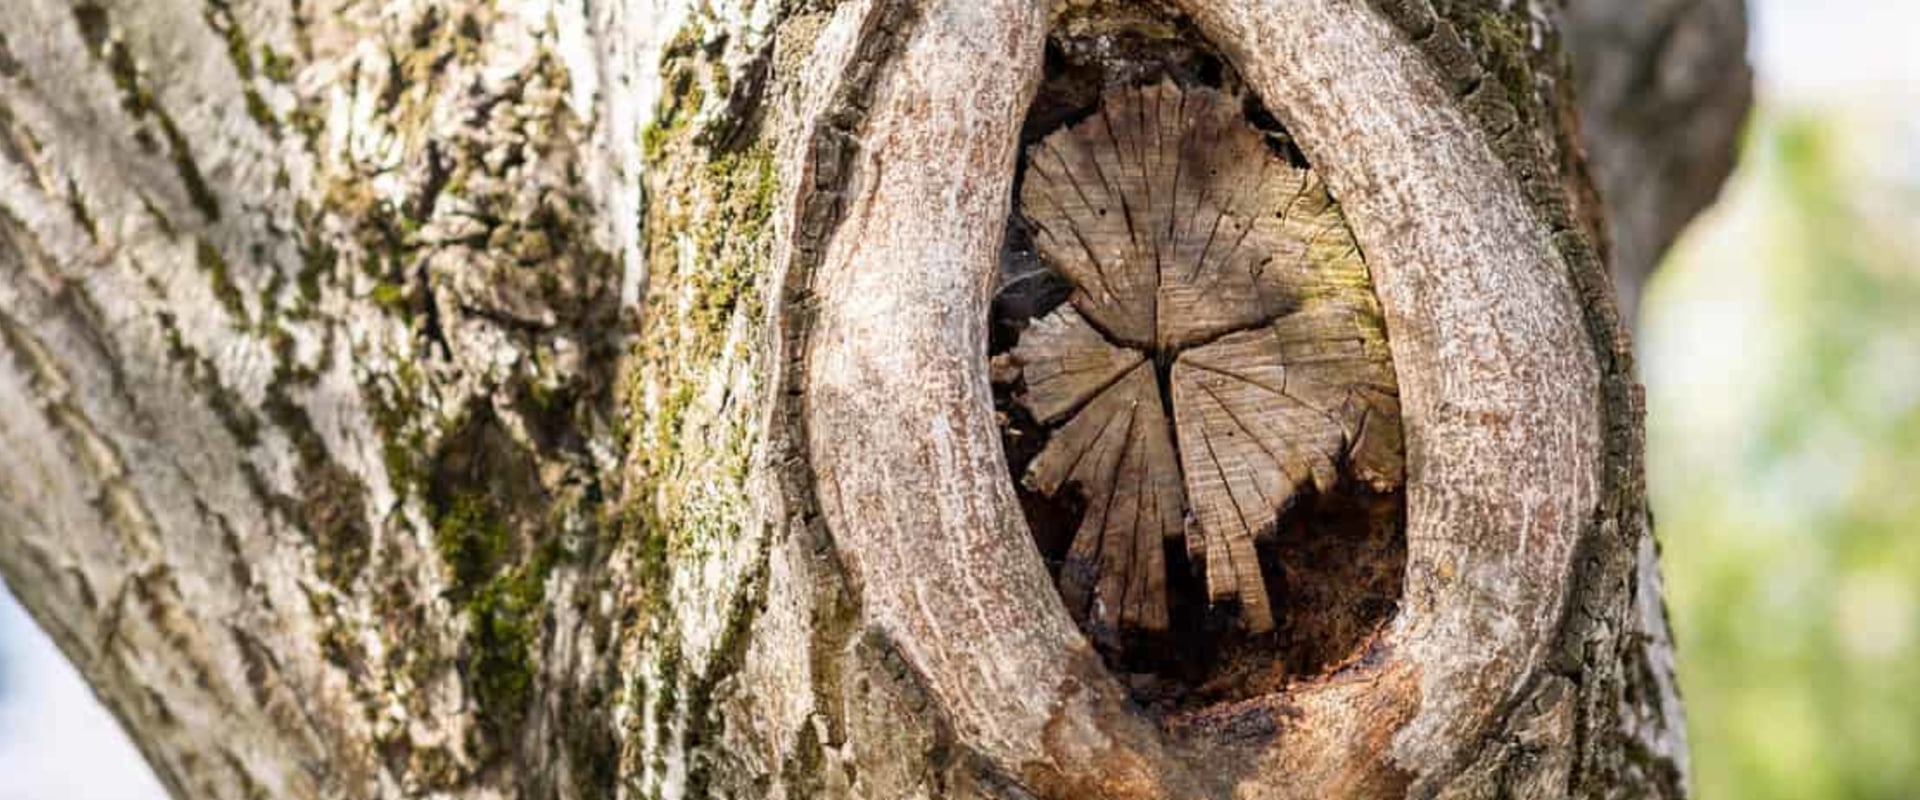 Can tree fungus be cured?